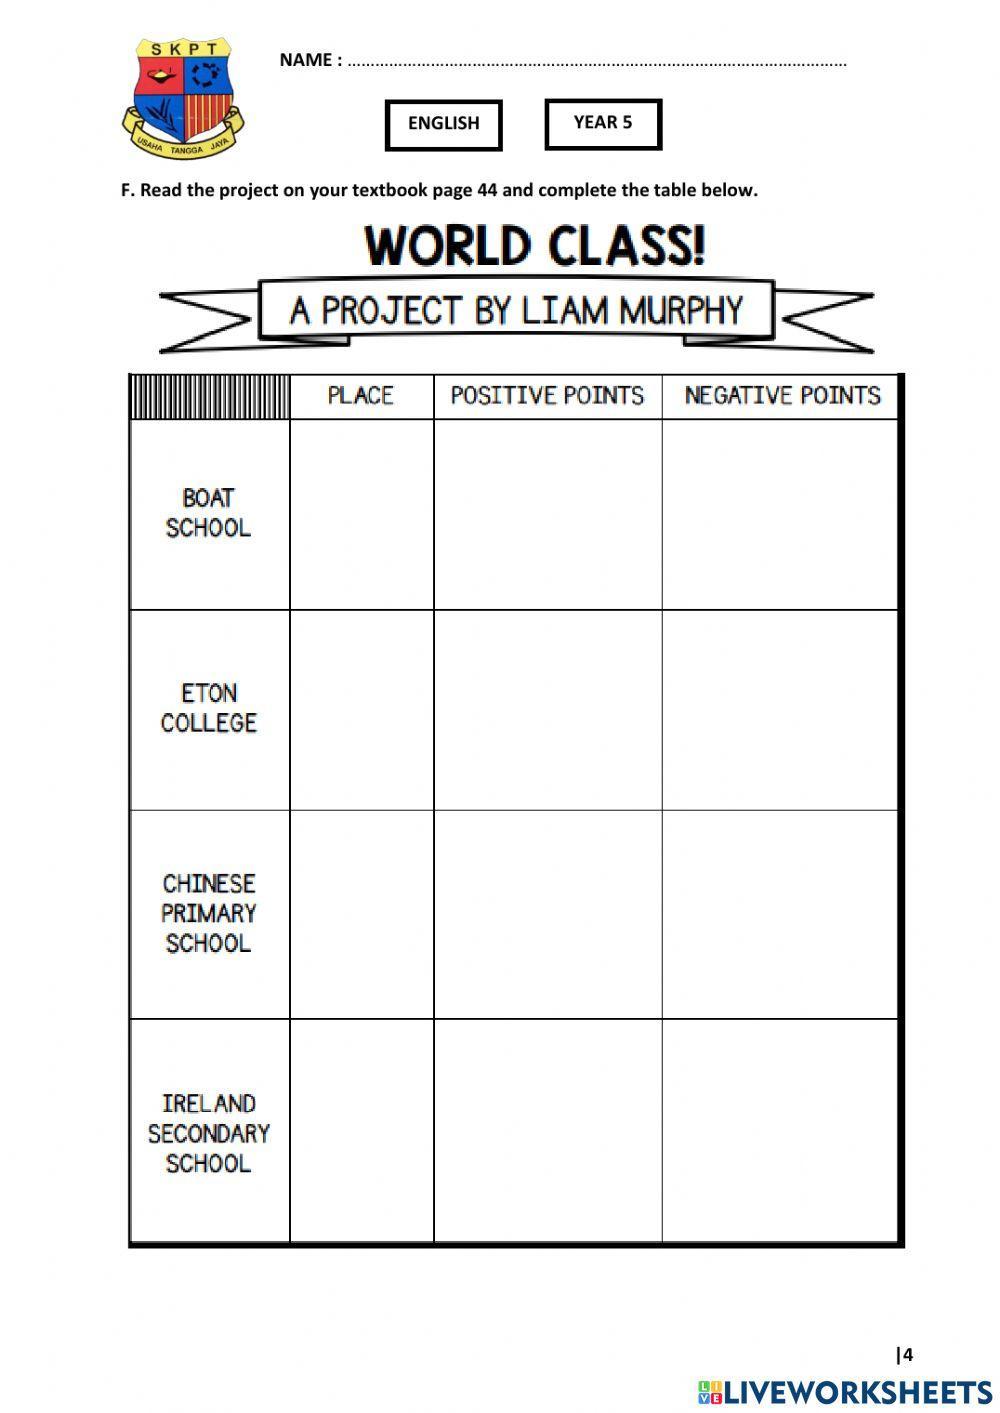 Year 5 Plus 1 - Unit 4 Learning World - Student's Book Page 44